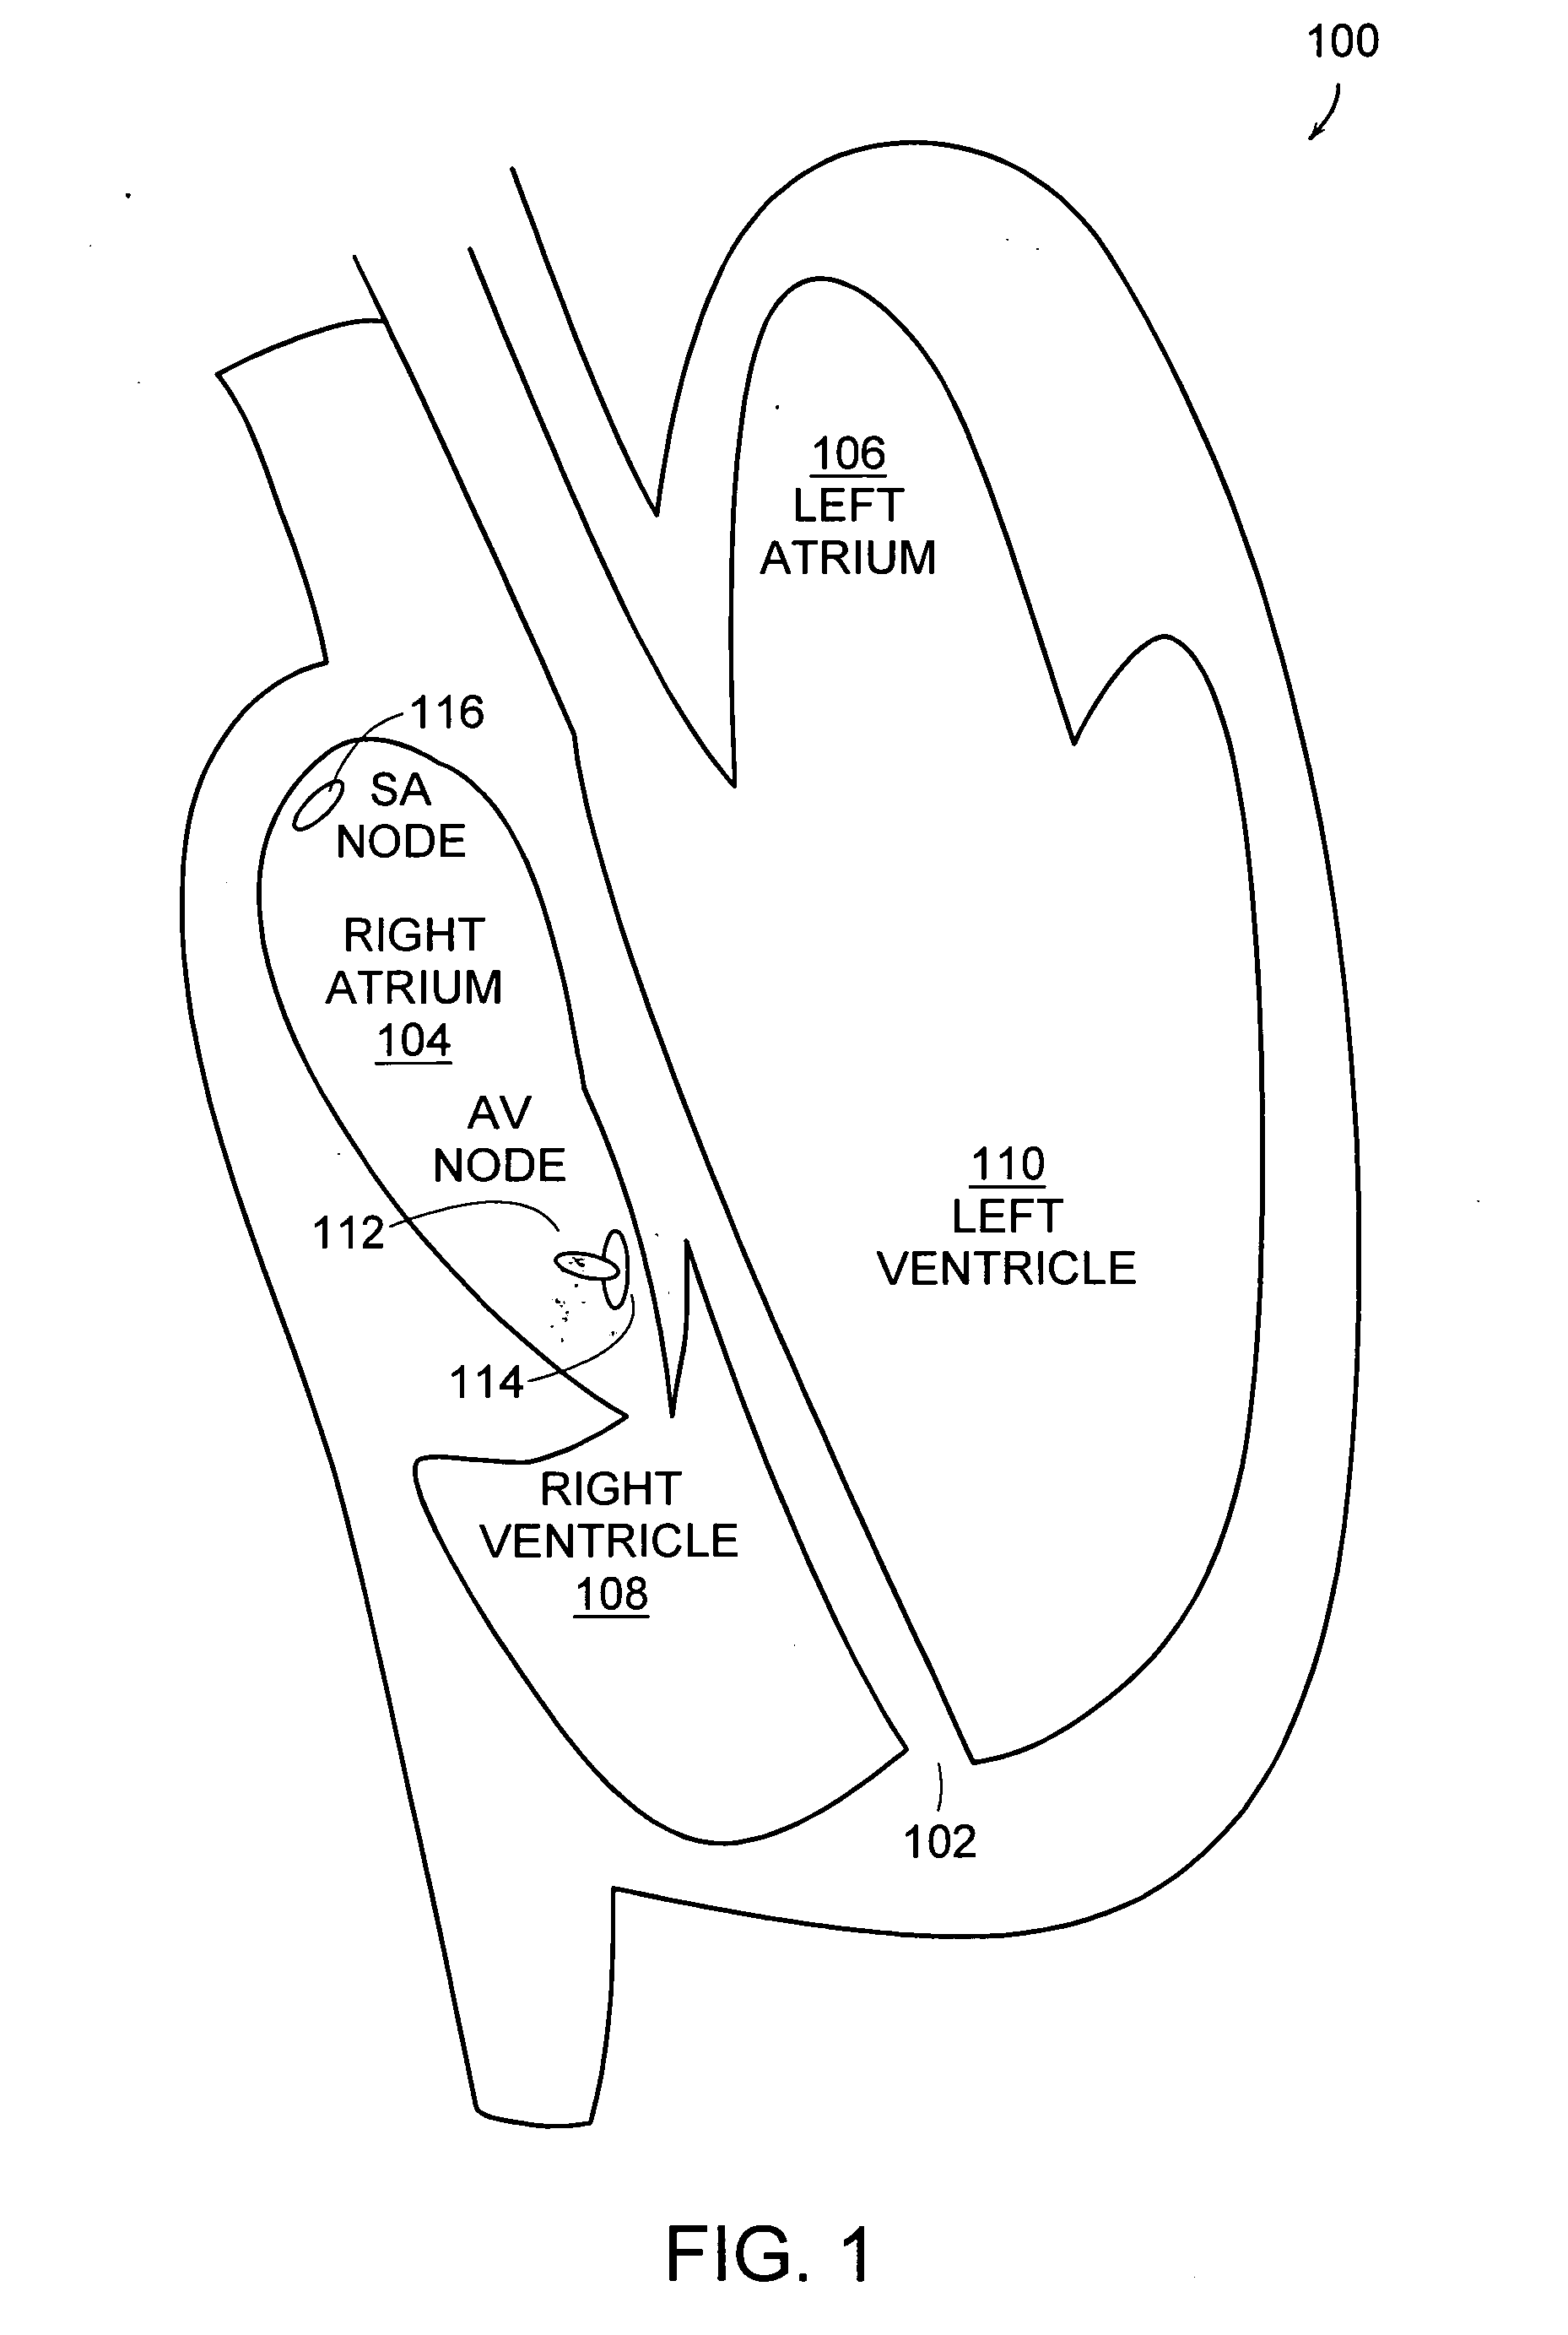 Method and system for detecting premature ventricular contraction from a surface electrocardiogram